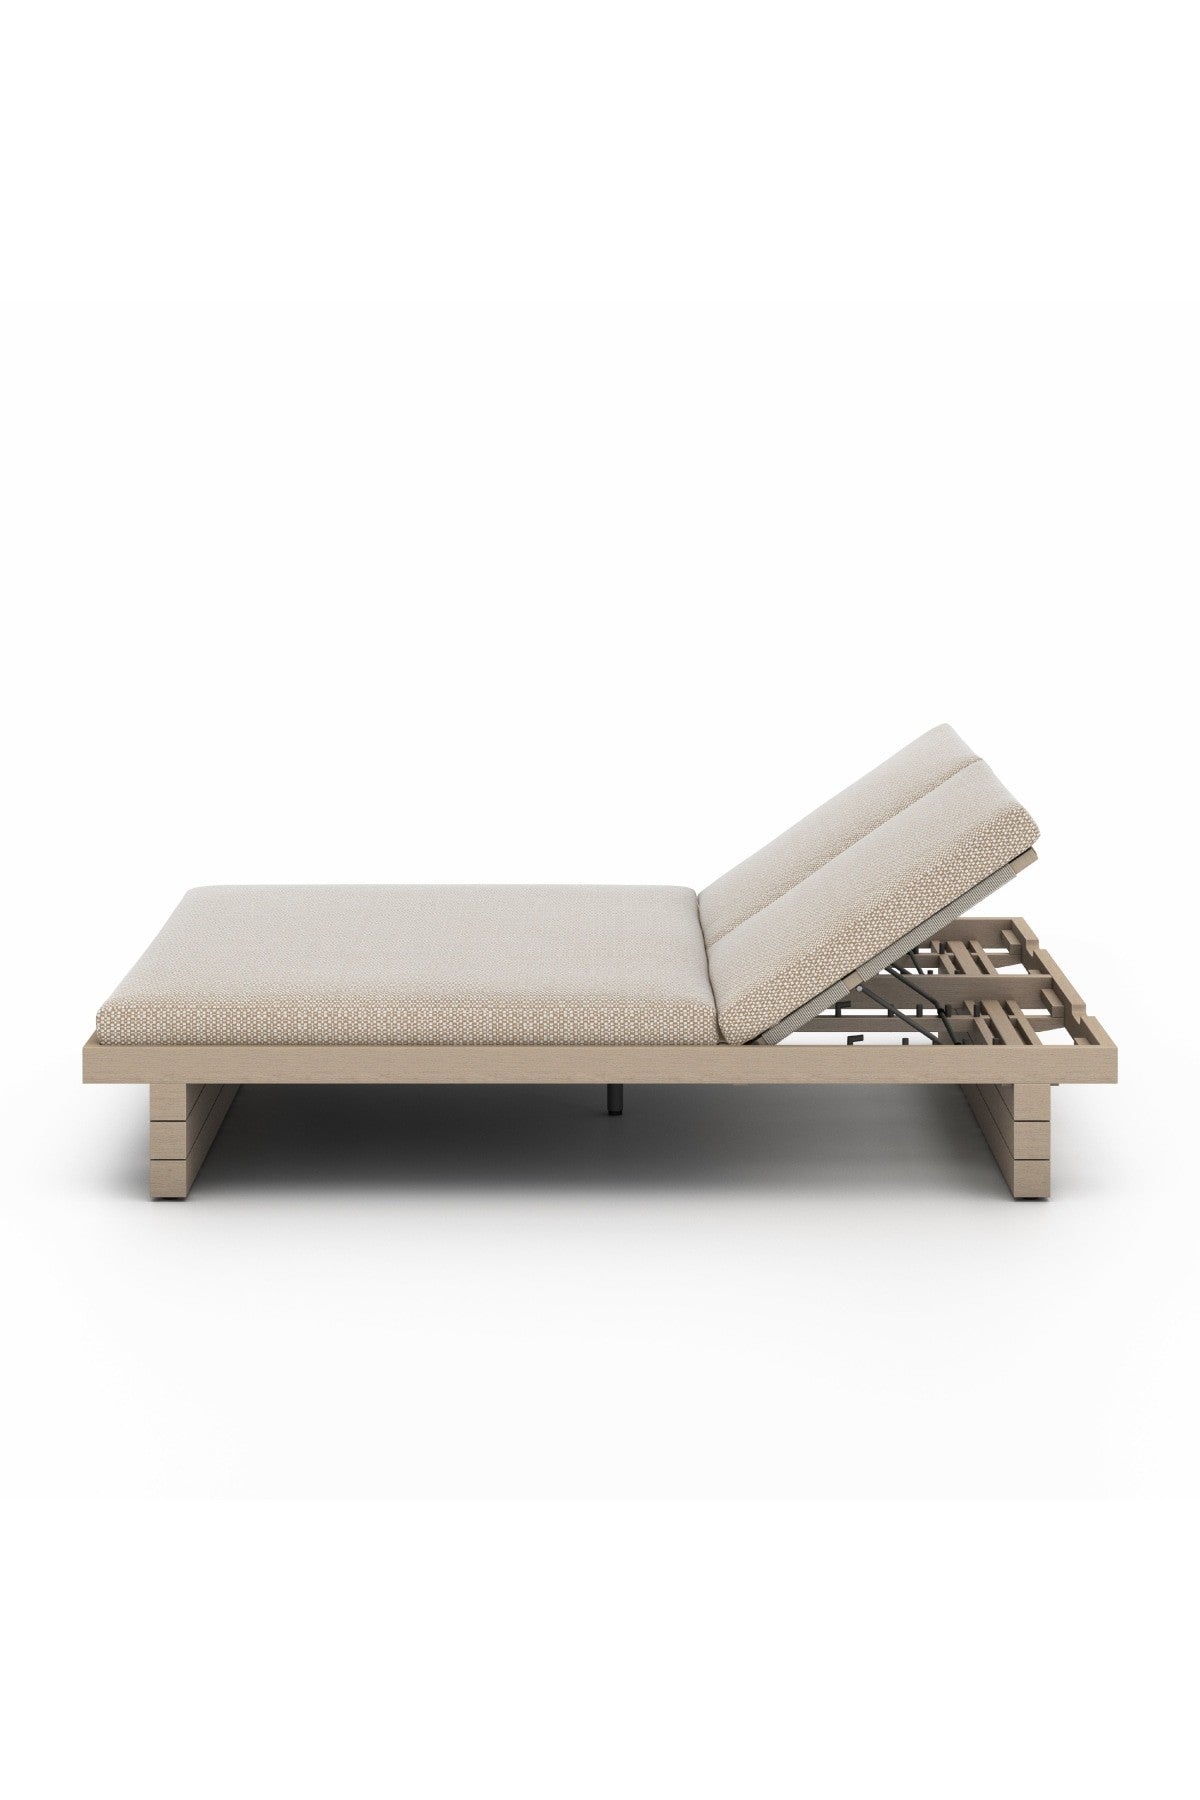 Laros Outdoor Double Chaise